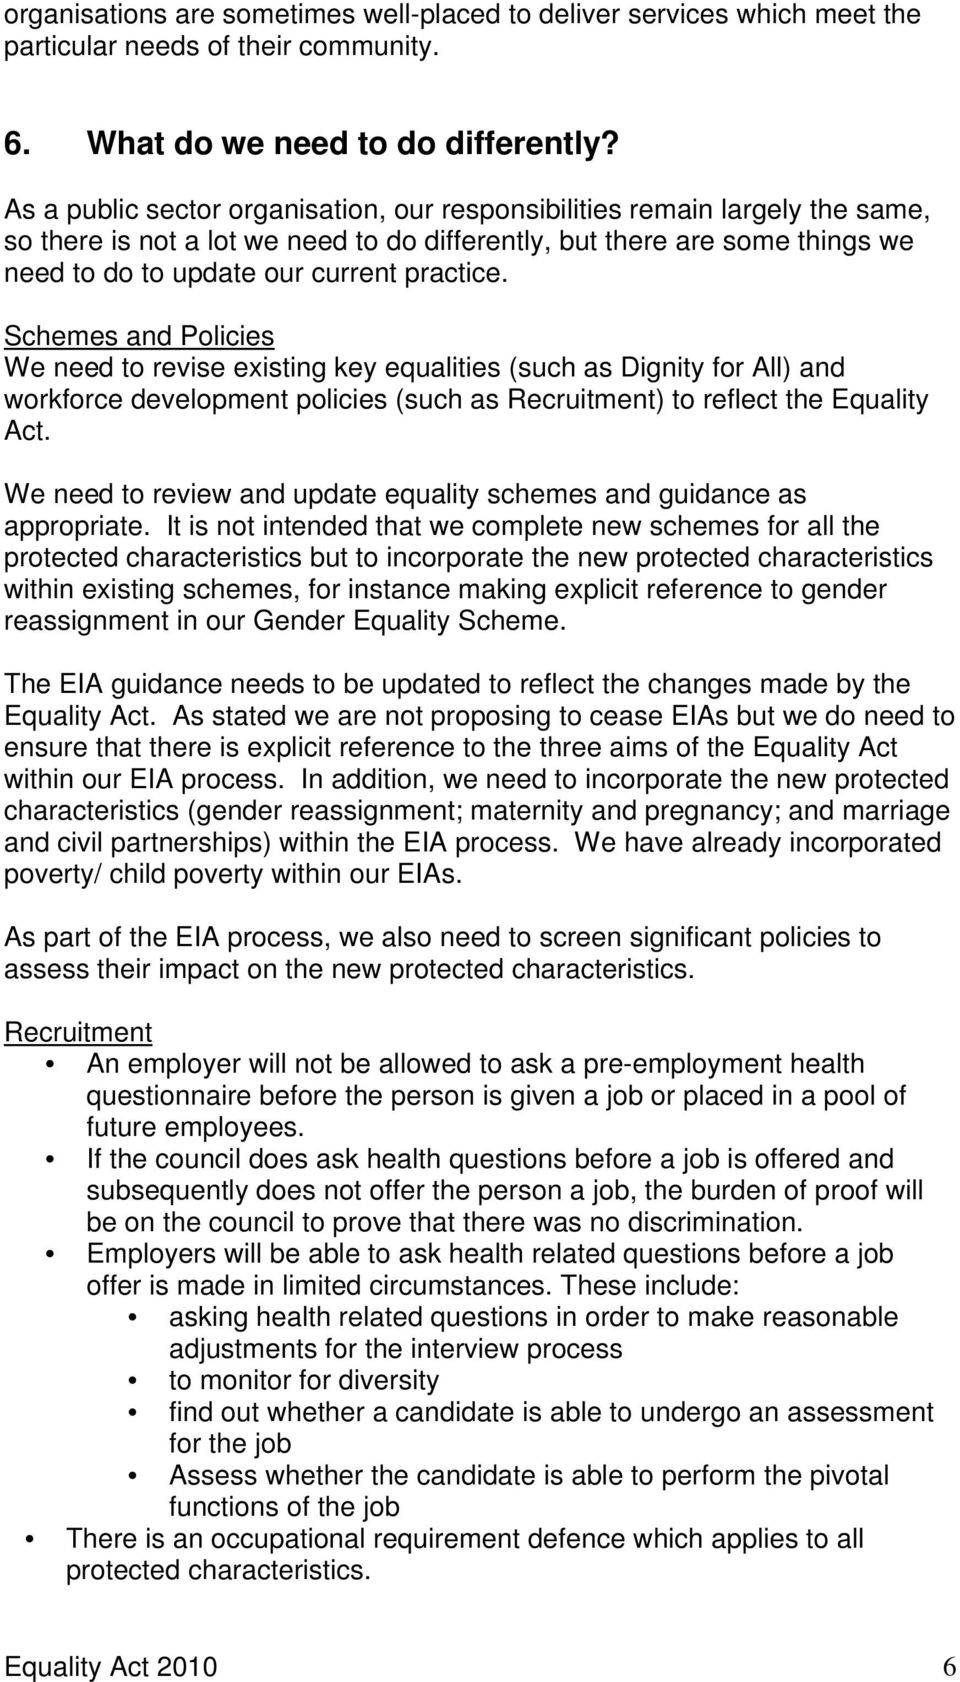 Schemes and Policies We need to revise existing key equalities (such as Dignity for All) and workforce development policies (such as Recruitment) to reflect the Equality Act.